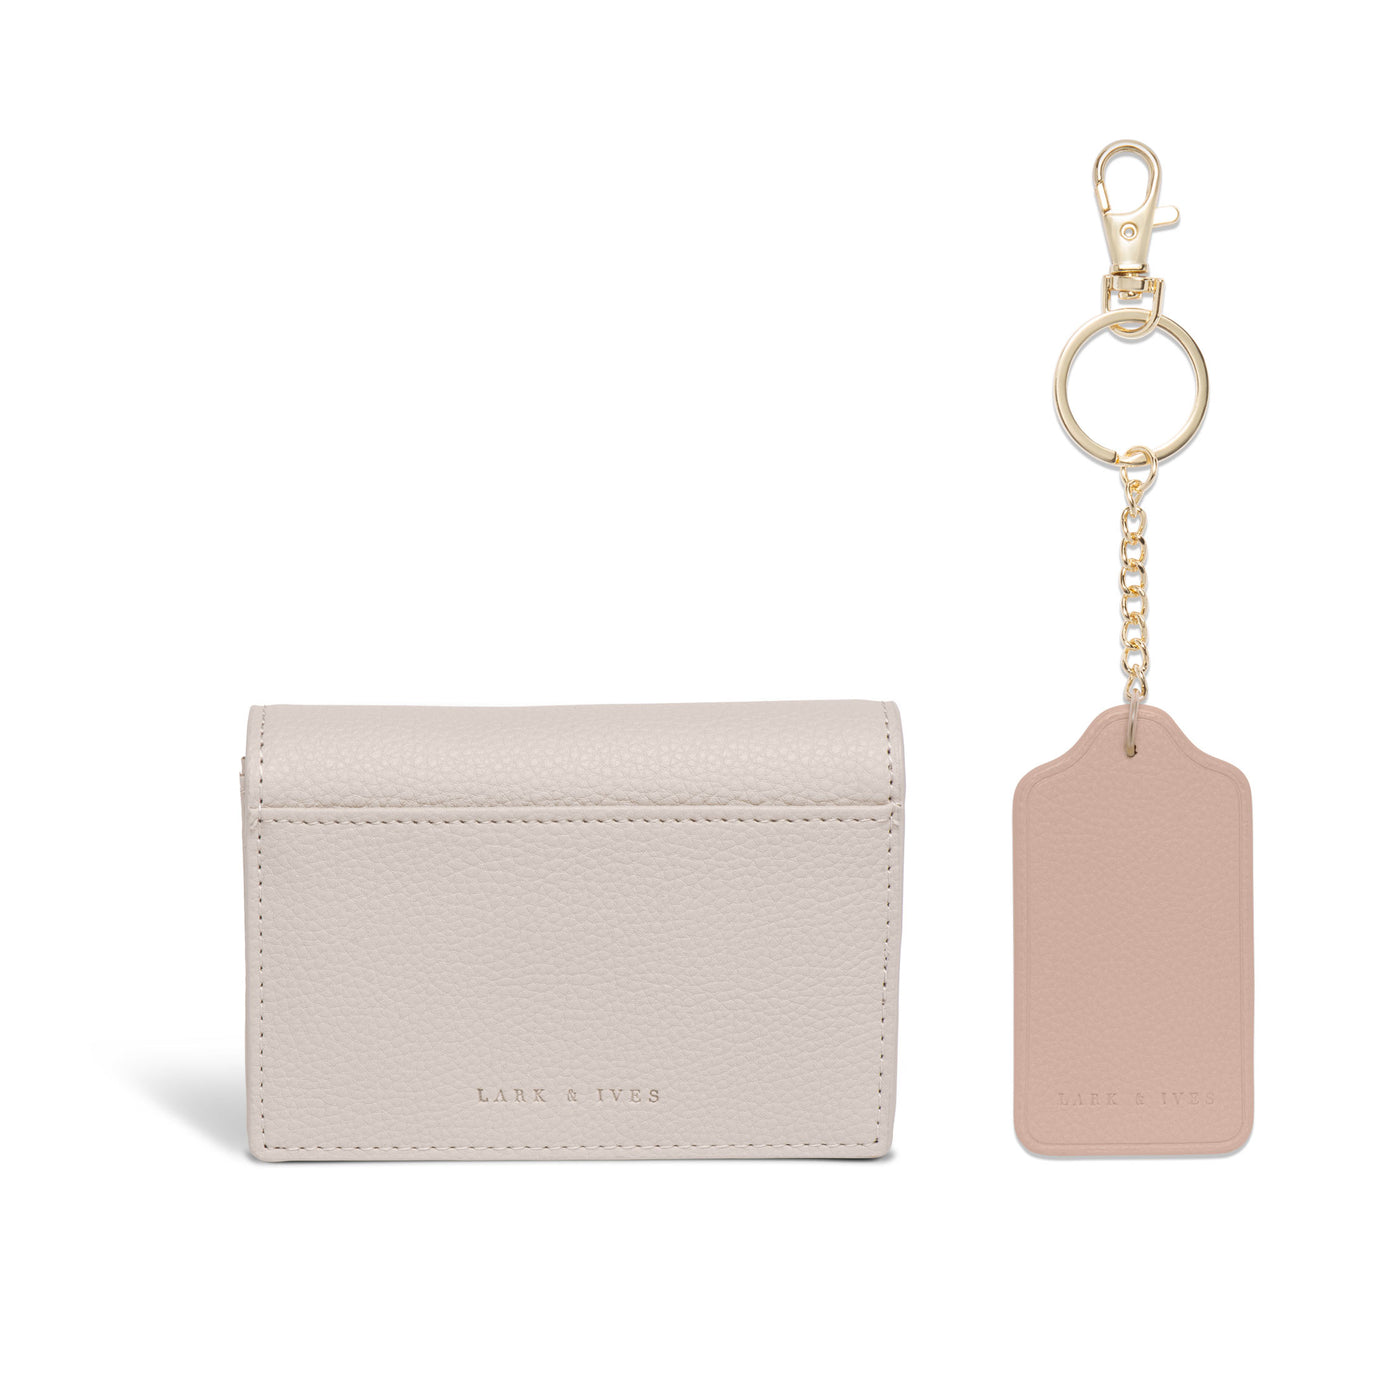 Lark and Ives / Vegan Leather Accessories / Small Accessories / Wallet / Mini Wallet / Card Case / Card Holder / Button snap closure / Fold Wallet / Tag Keychain / Keychain / Key Holder / Light Beige Card Case and Nude Pink Keychain